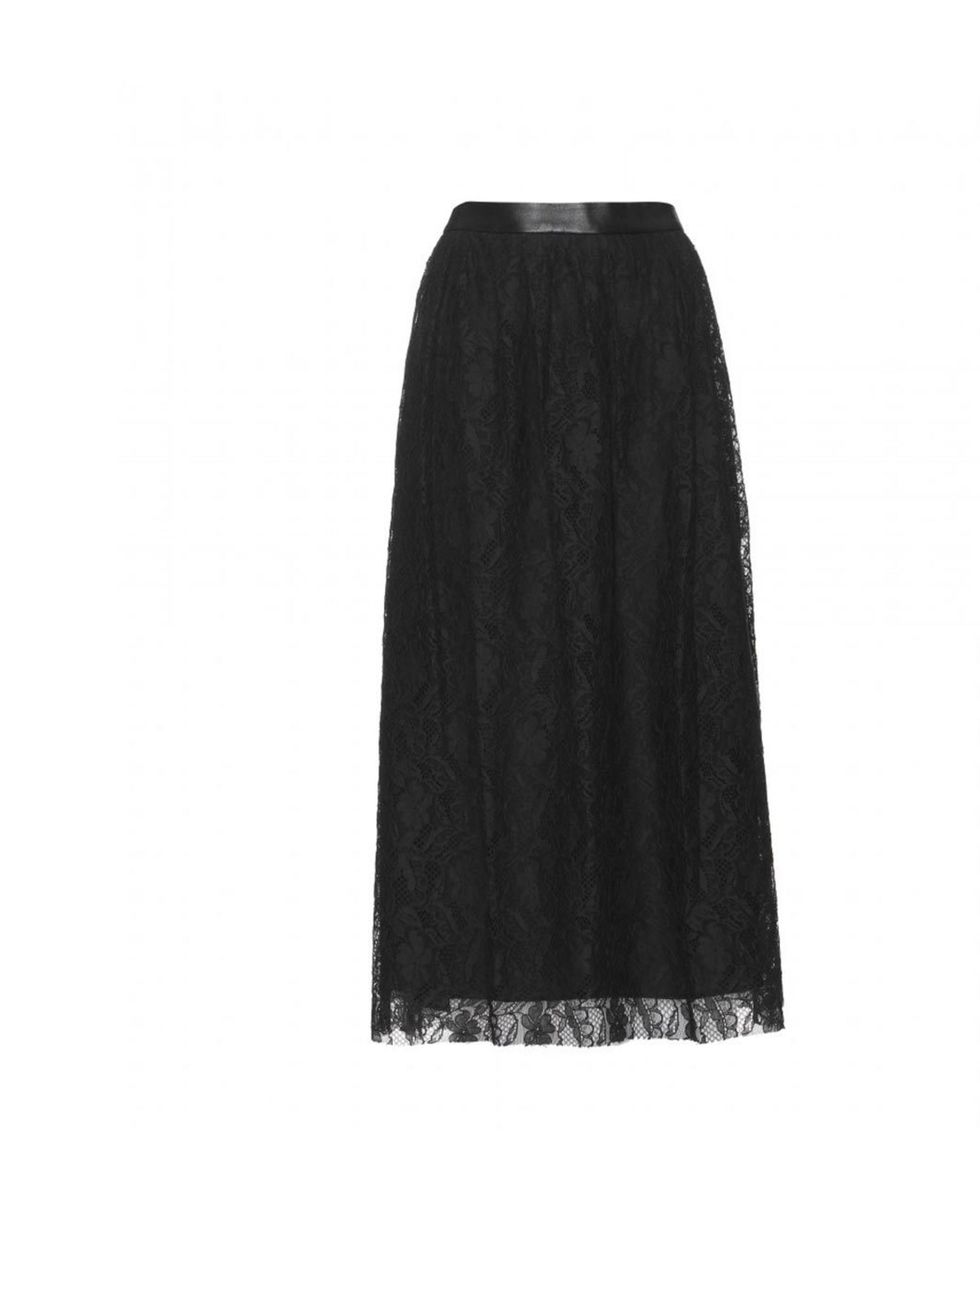 <p>Mulberry lace below-the-knee skirt, £450, at <a href="http://www.mytheresa.com/uk_en/skirt-with-lace-and-leather-detail.html">mytheresa.com</a></p>